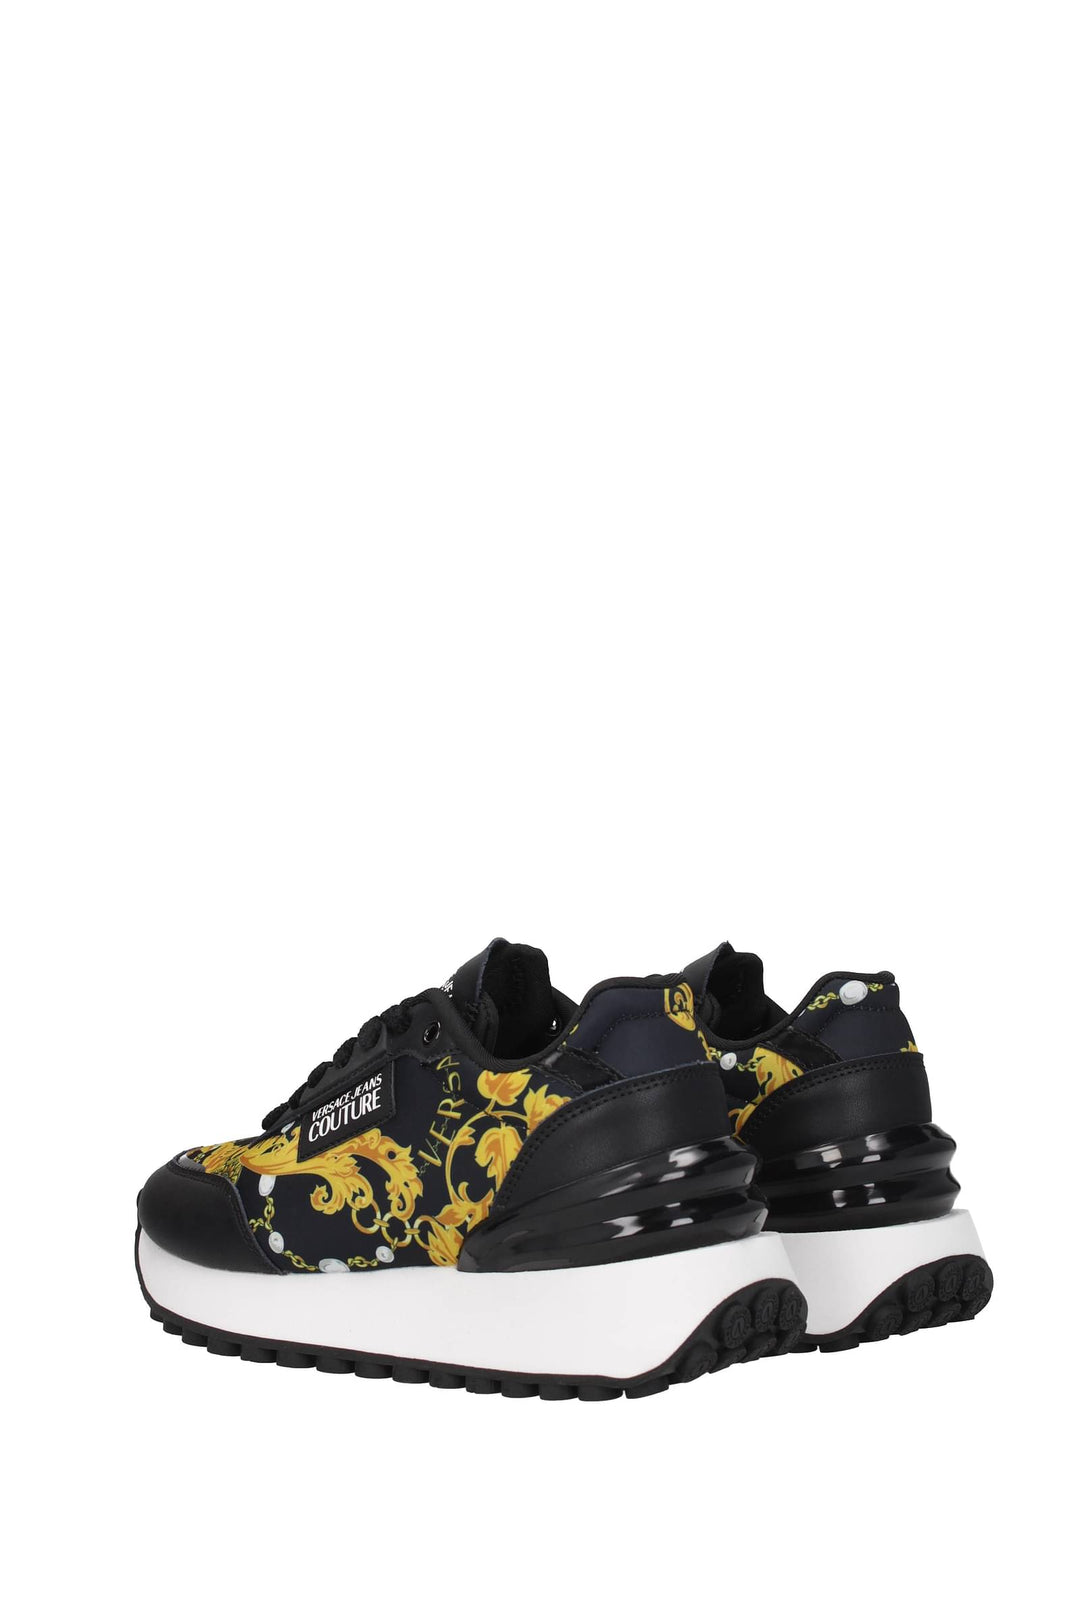 Versace Jeans Sneakers Couture Tessuto Nero - Versace Jeans Couture - Donna